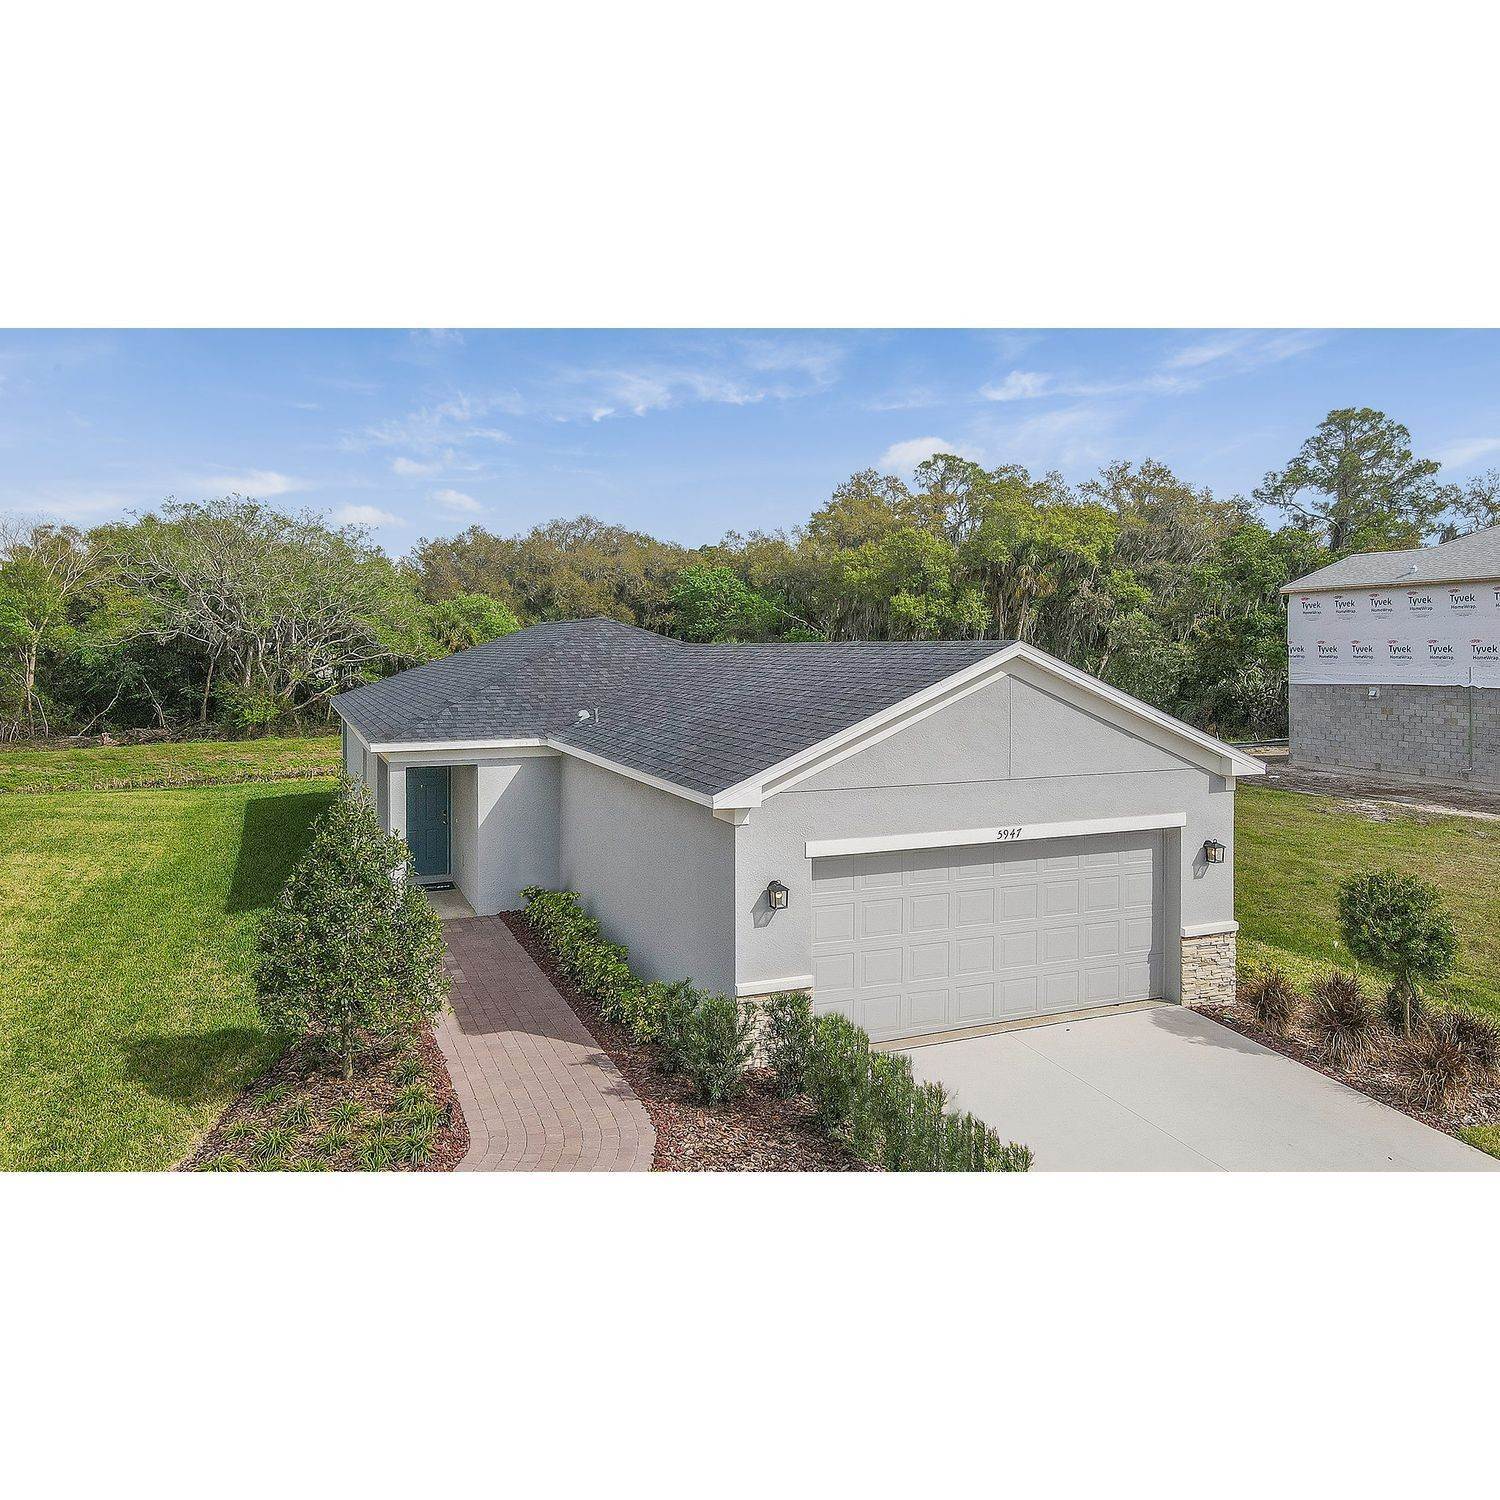 30. Eave's Bend at Artisan Lakes building at 5967 Maidenstone Way, Palmetto, FL 34221